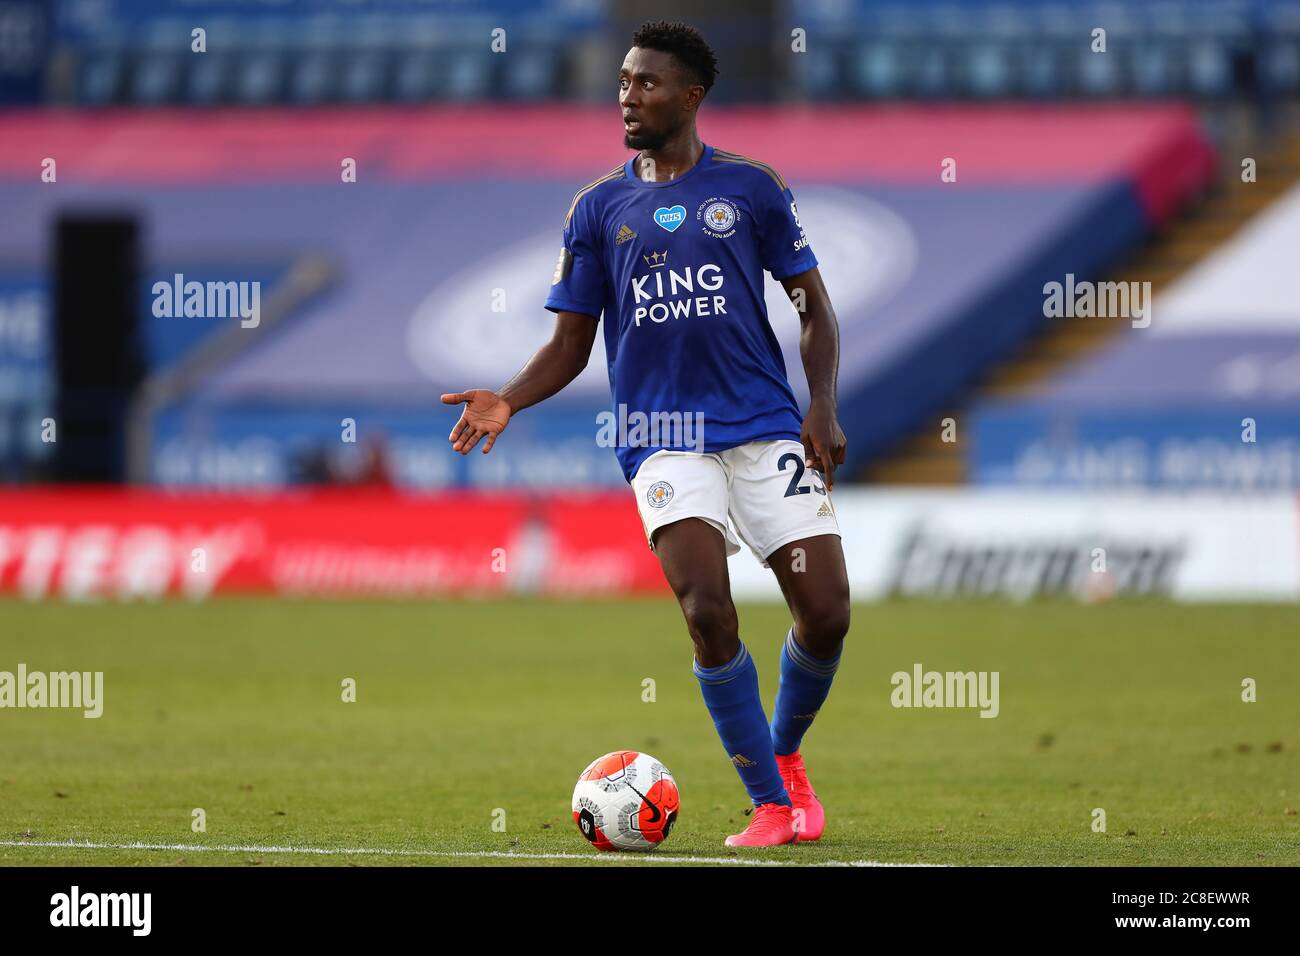 Wilfred Ndidi of Leicester City in action during the Premier League match between Leicester City and Sheffield United at King Power Stadium.(Final Score; Leicester City 2 - 0 Sheffield United) Stock Photo